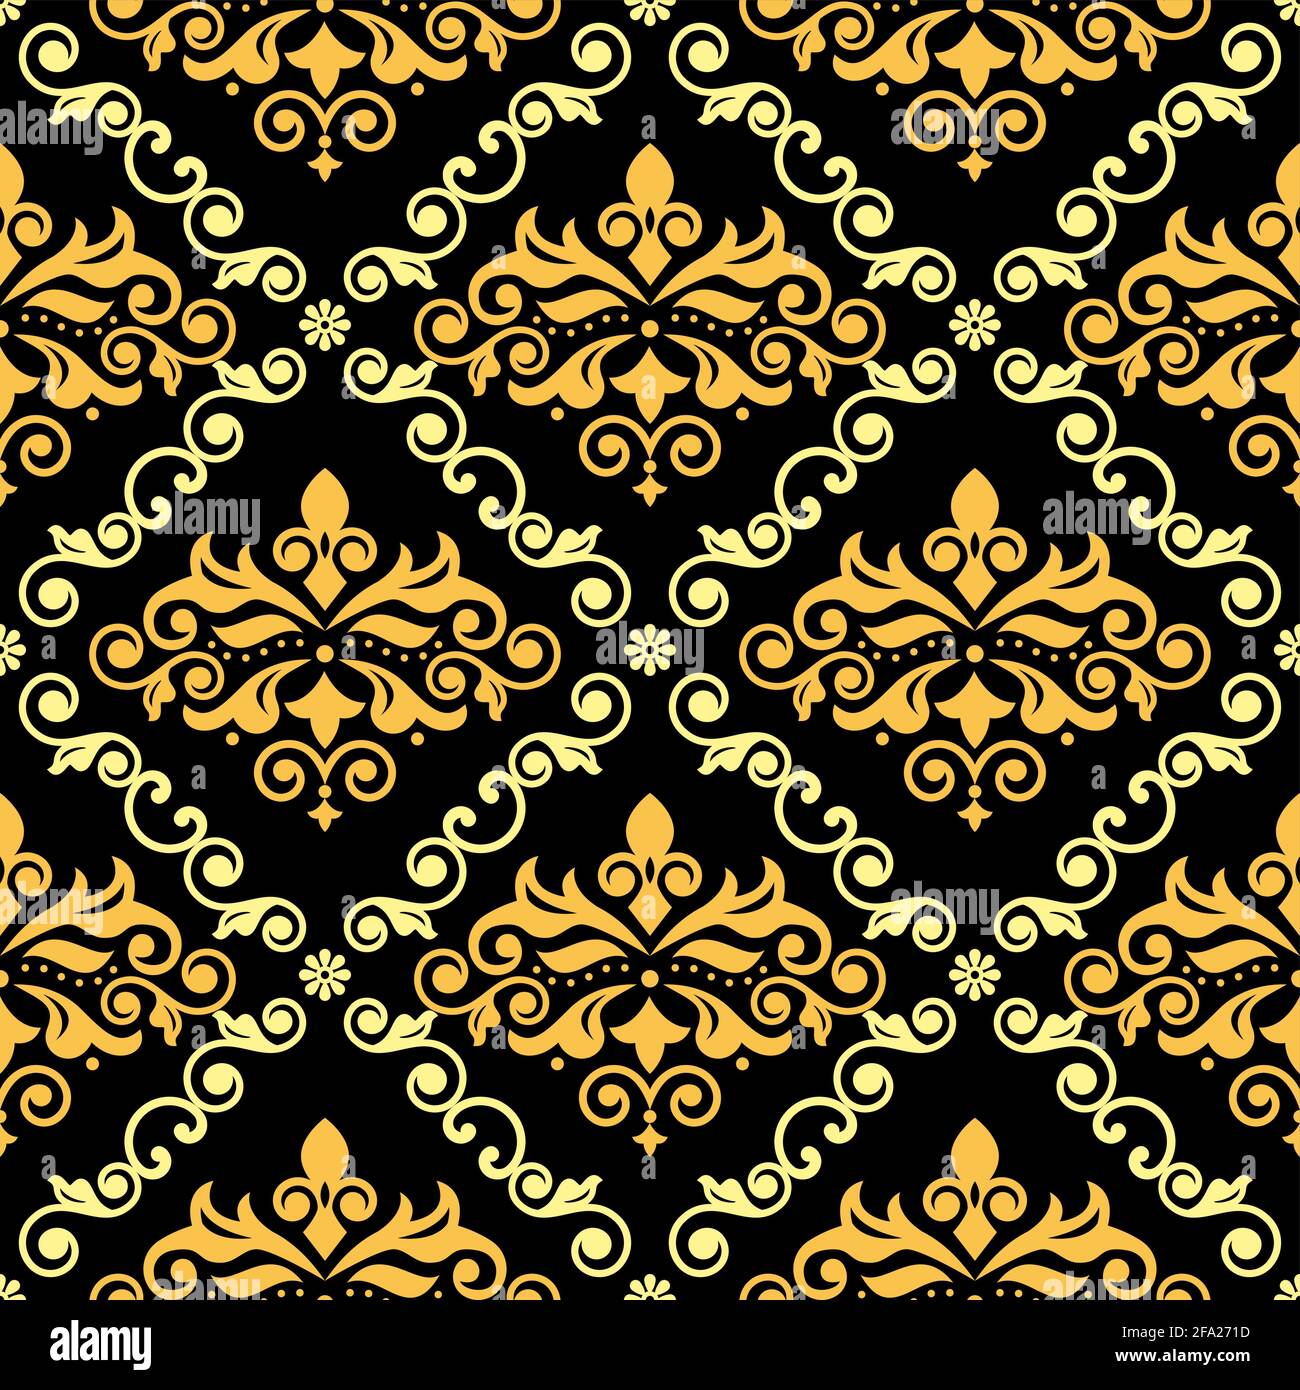 Luxury arabic Damask wallpaper or fabric print pattern, retro textile vector seamless design with flowers, leaves and swirls Stock Vector